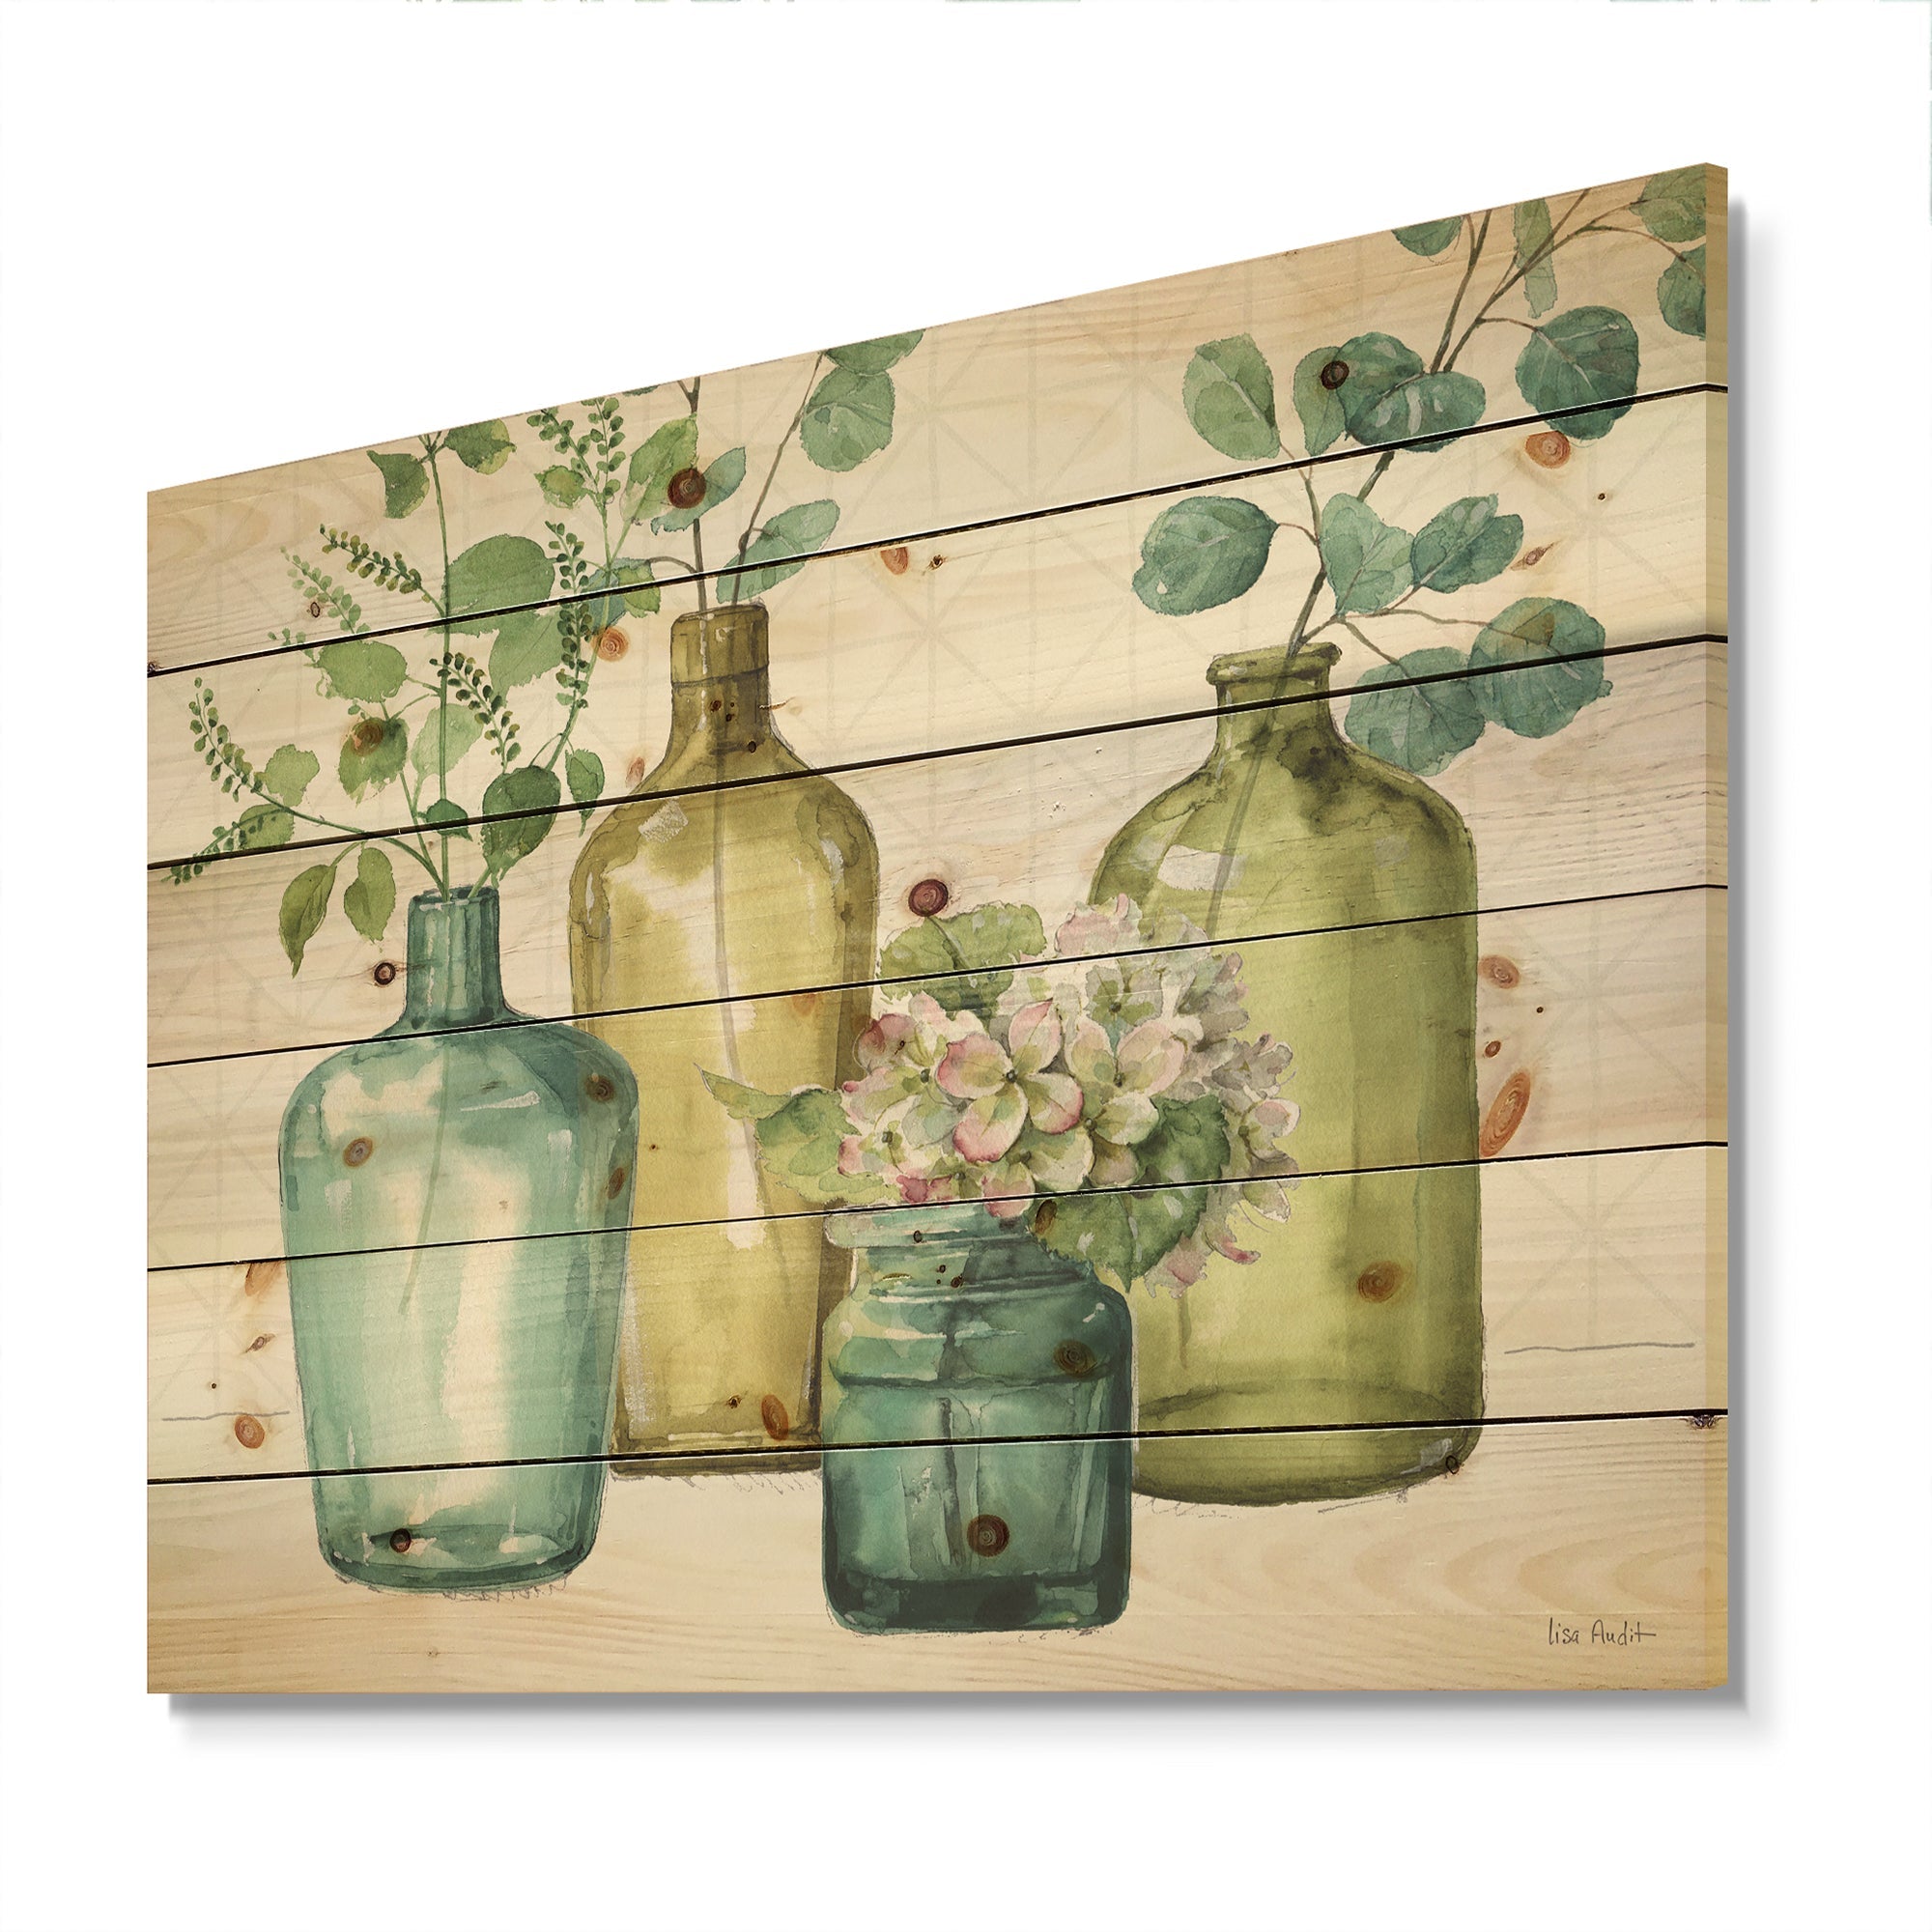 Mixed Botanical Green Leaves VIII - Cottage Print on Natural Pine Wood - 20x15